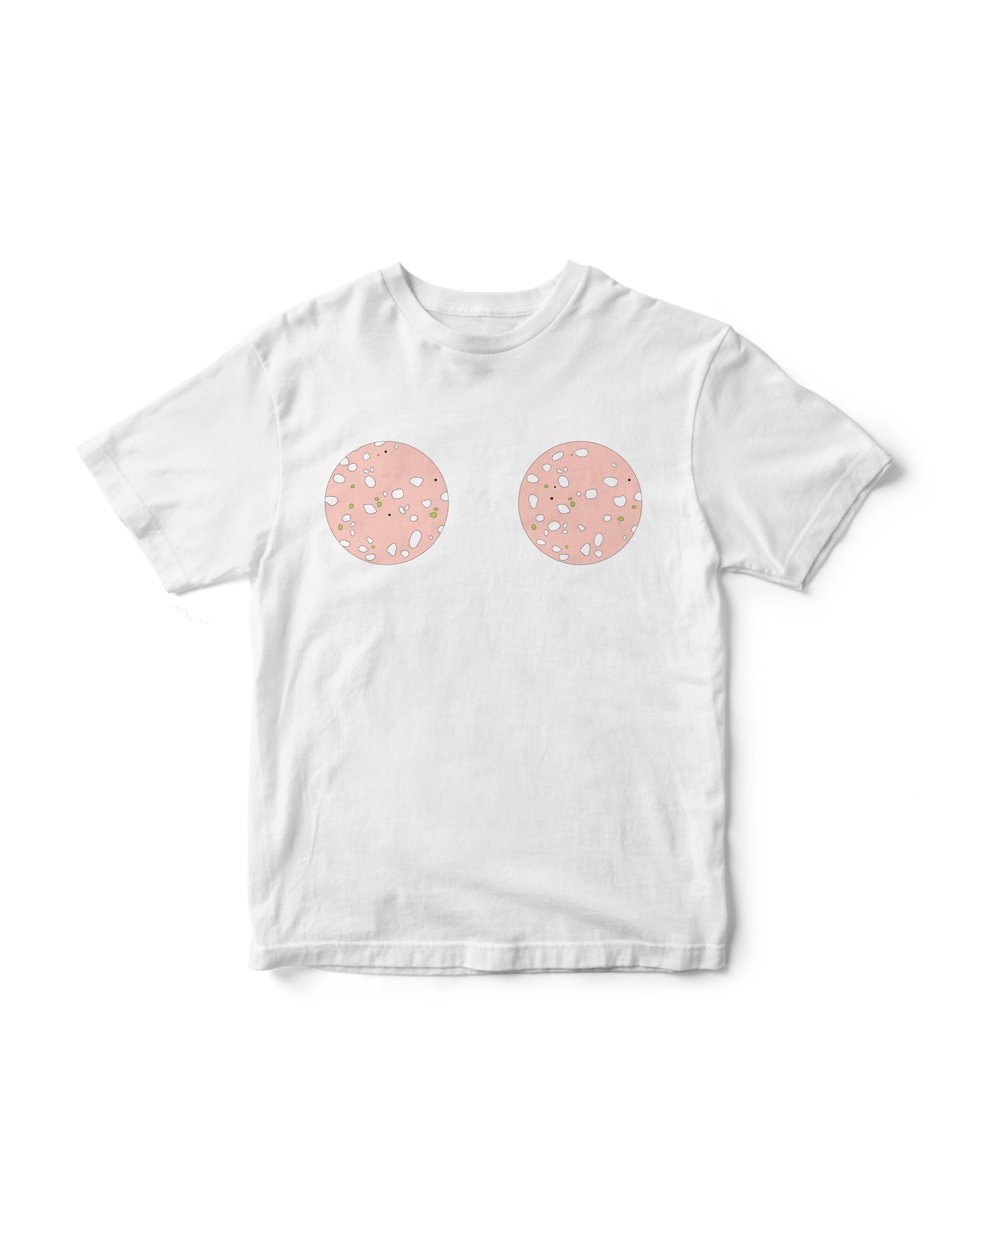 White t-shirt with two slices of mortadella in the middle, chest area. 